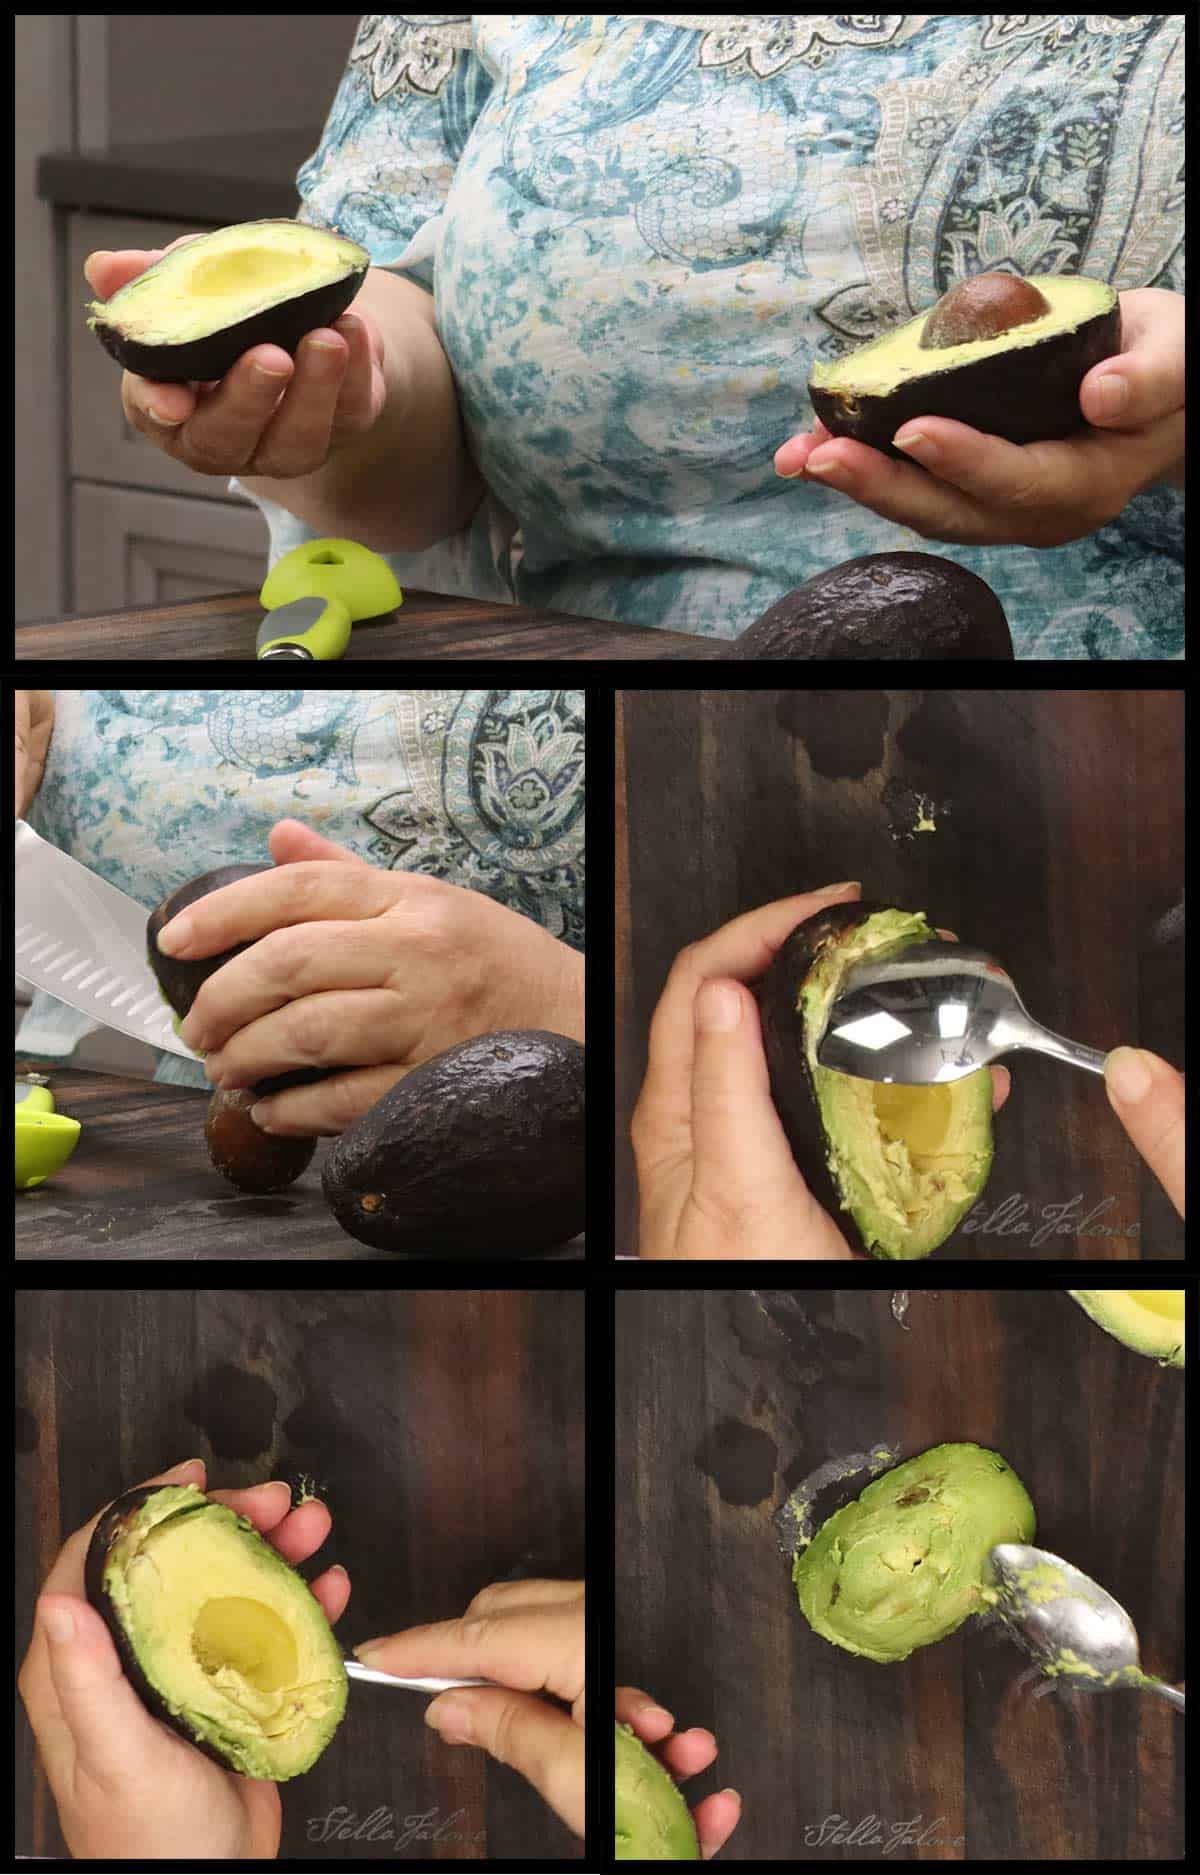 spooning the flesh out of the avocado.